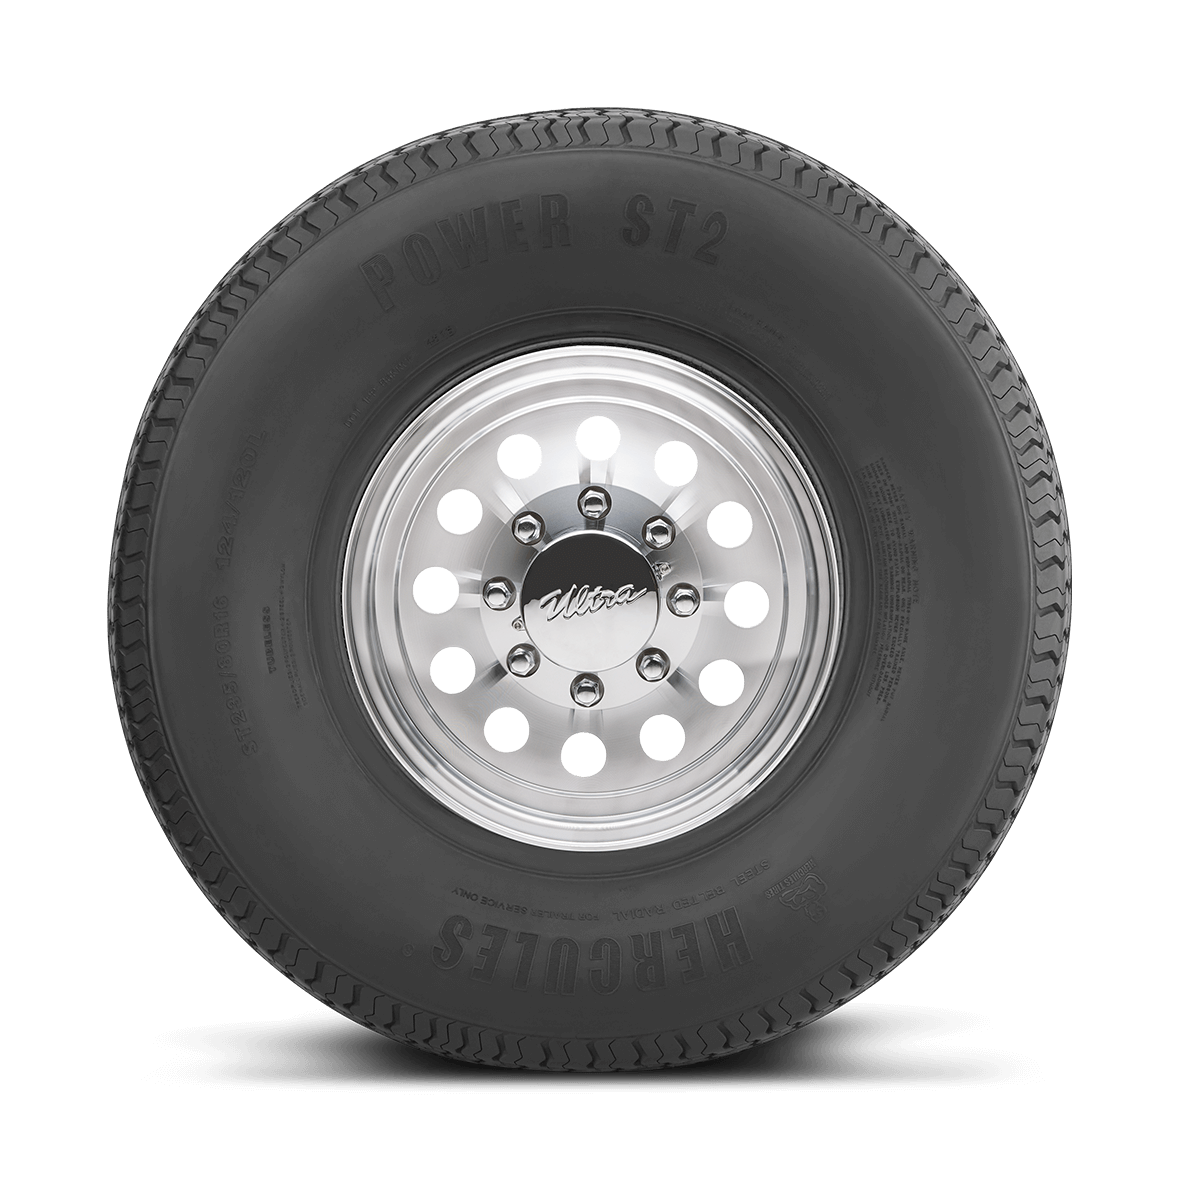 Straight on view of the Power Specialty Trailer 2 sidewall design and rim on a white background. 